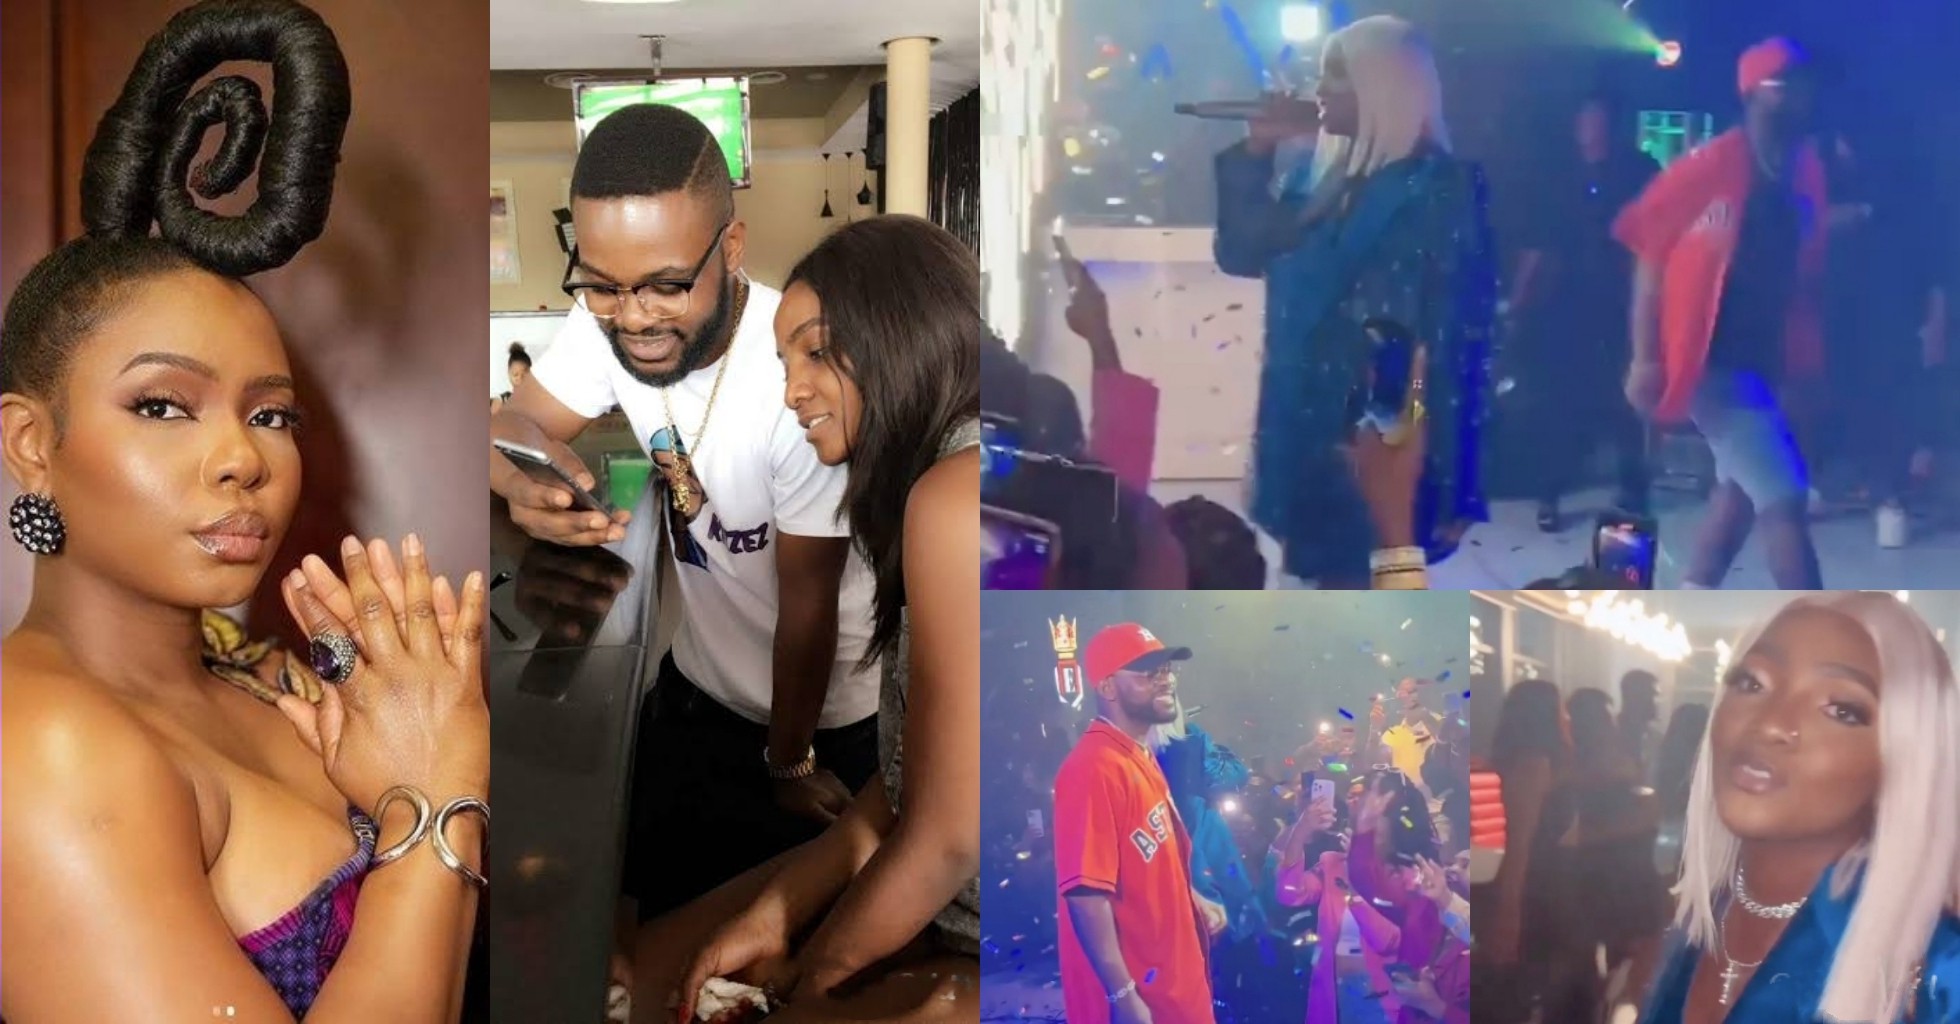 VIDEO: Yemi Alade reacts as Falz, Simi poke fun at each other, create an unforgettable moment on stage in US